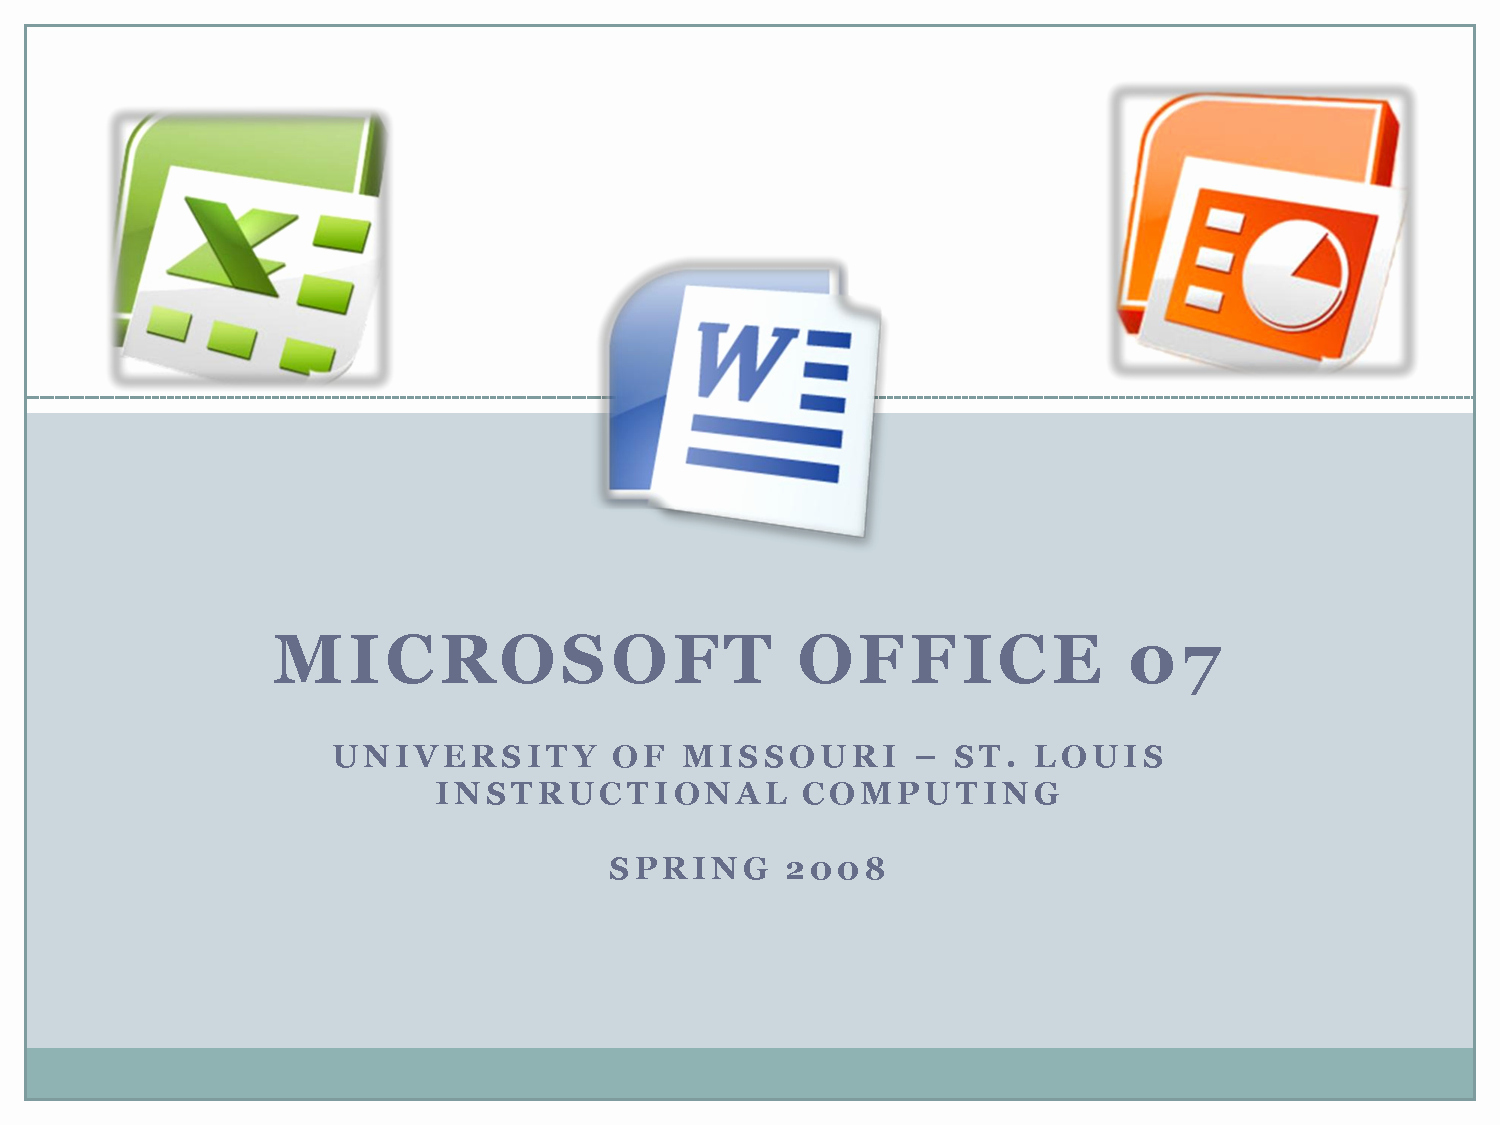 Microsoft Office Power Point Templates Awesome Microsoft Fice Powerpoint Templates